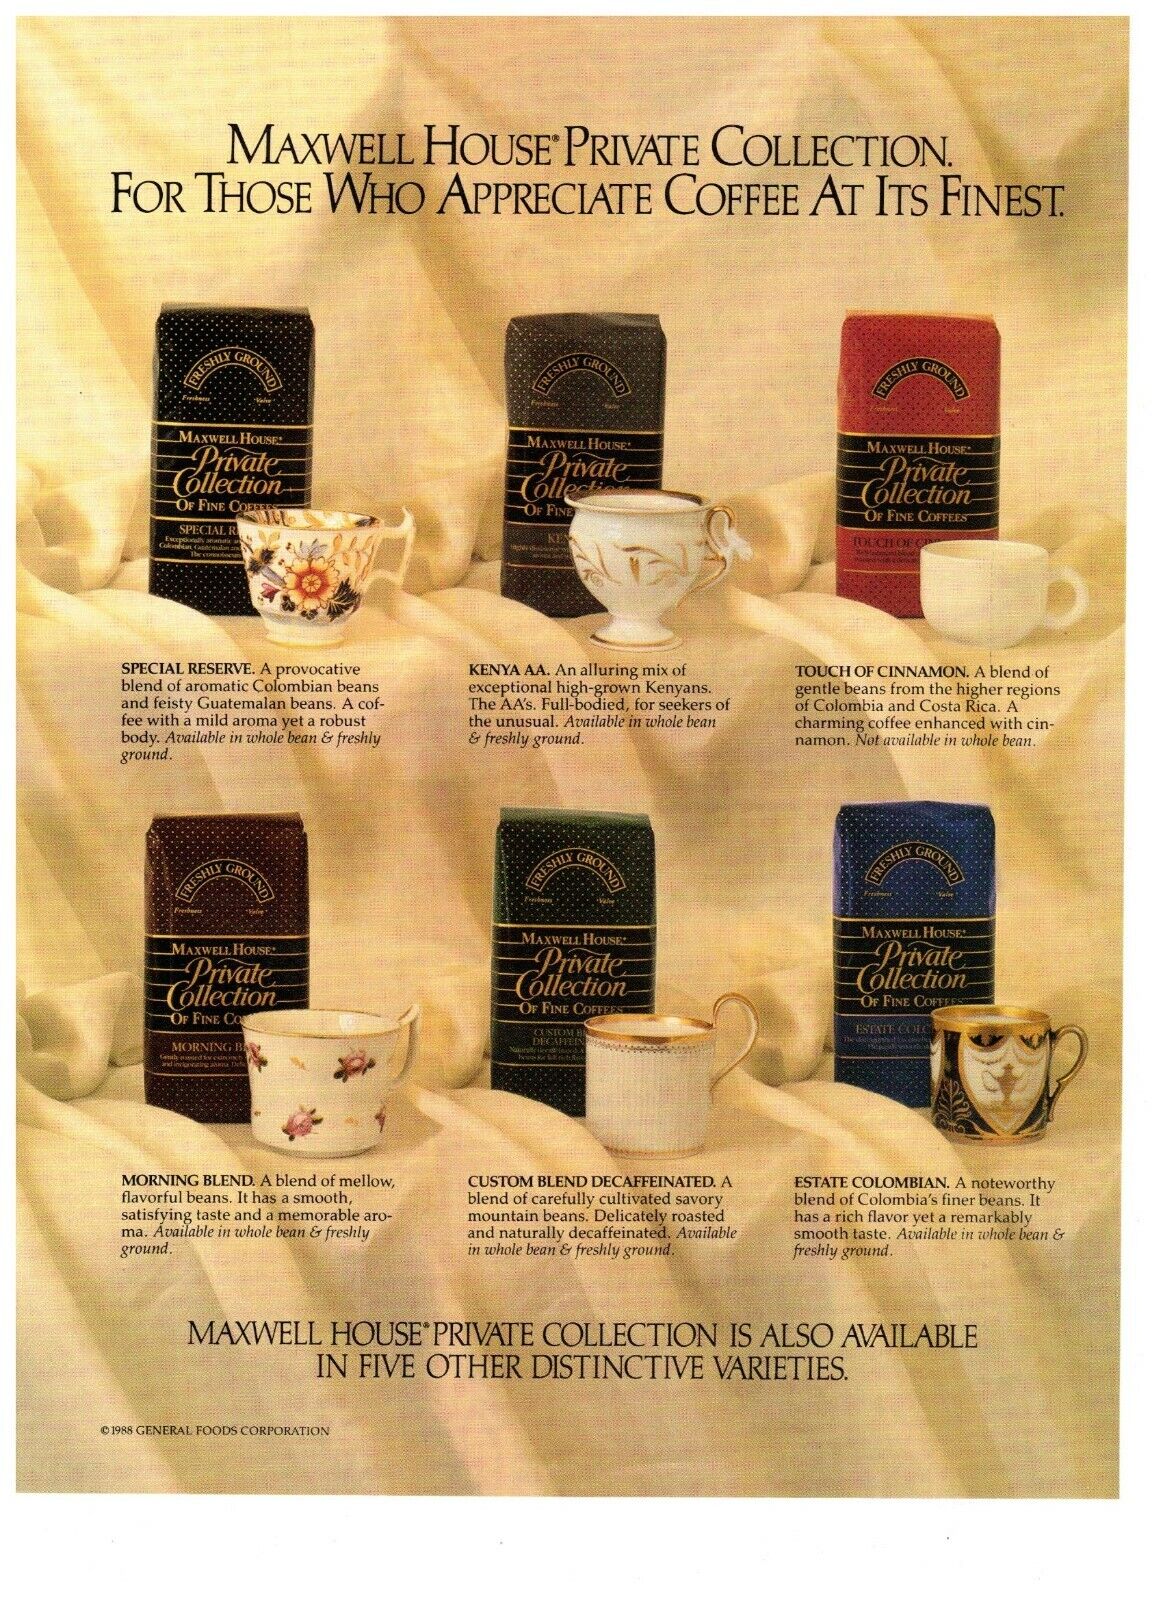 1989 Maxwell House Private Collection Gourmet Coffee Vintage Print Advertisement